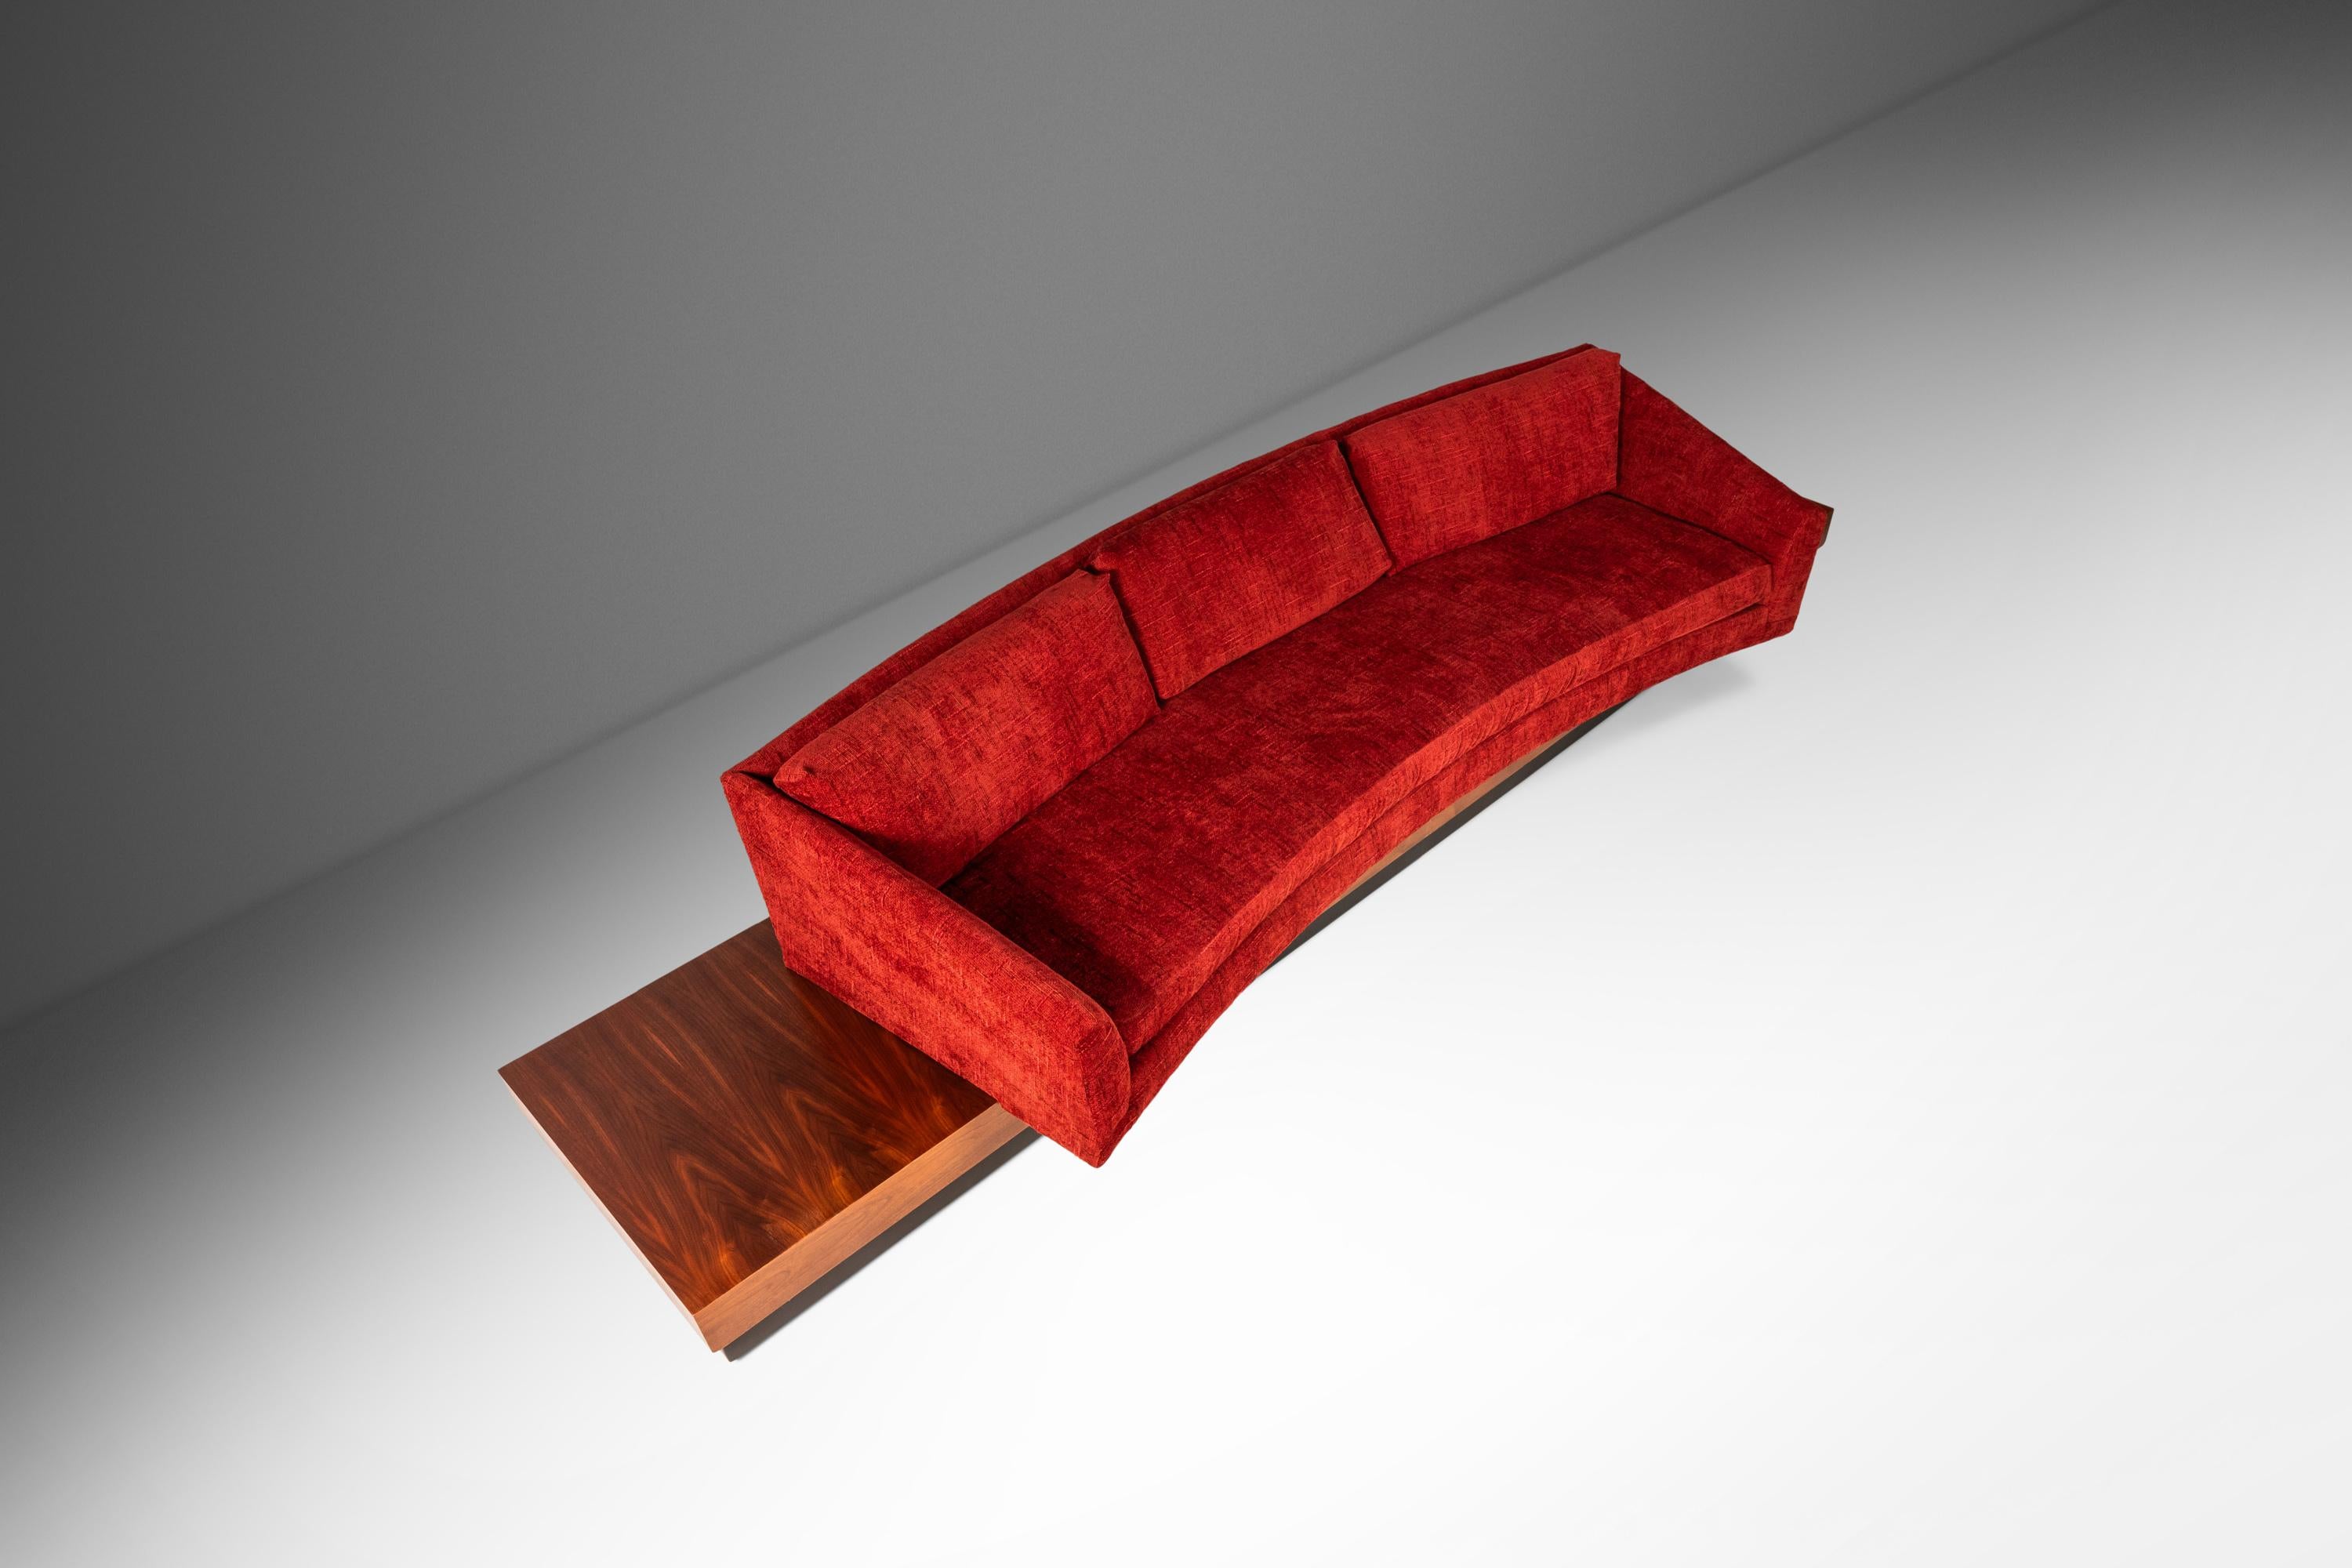 American Expansive 12-Foot Platform Sofa by Adrian Pearsall for Craft Associates, 1960s For Sale